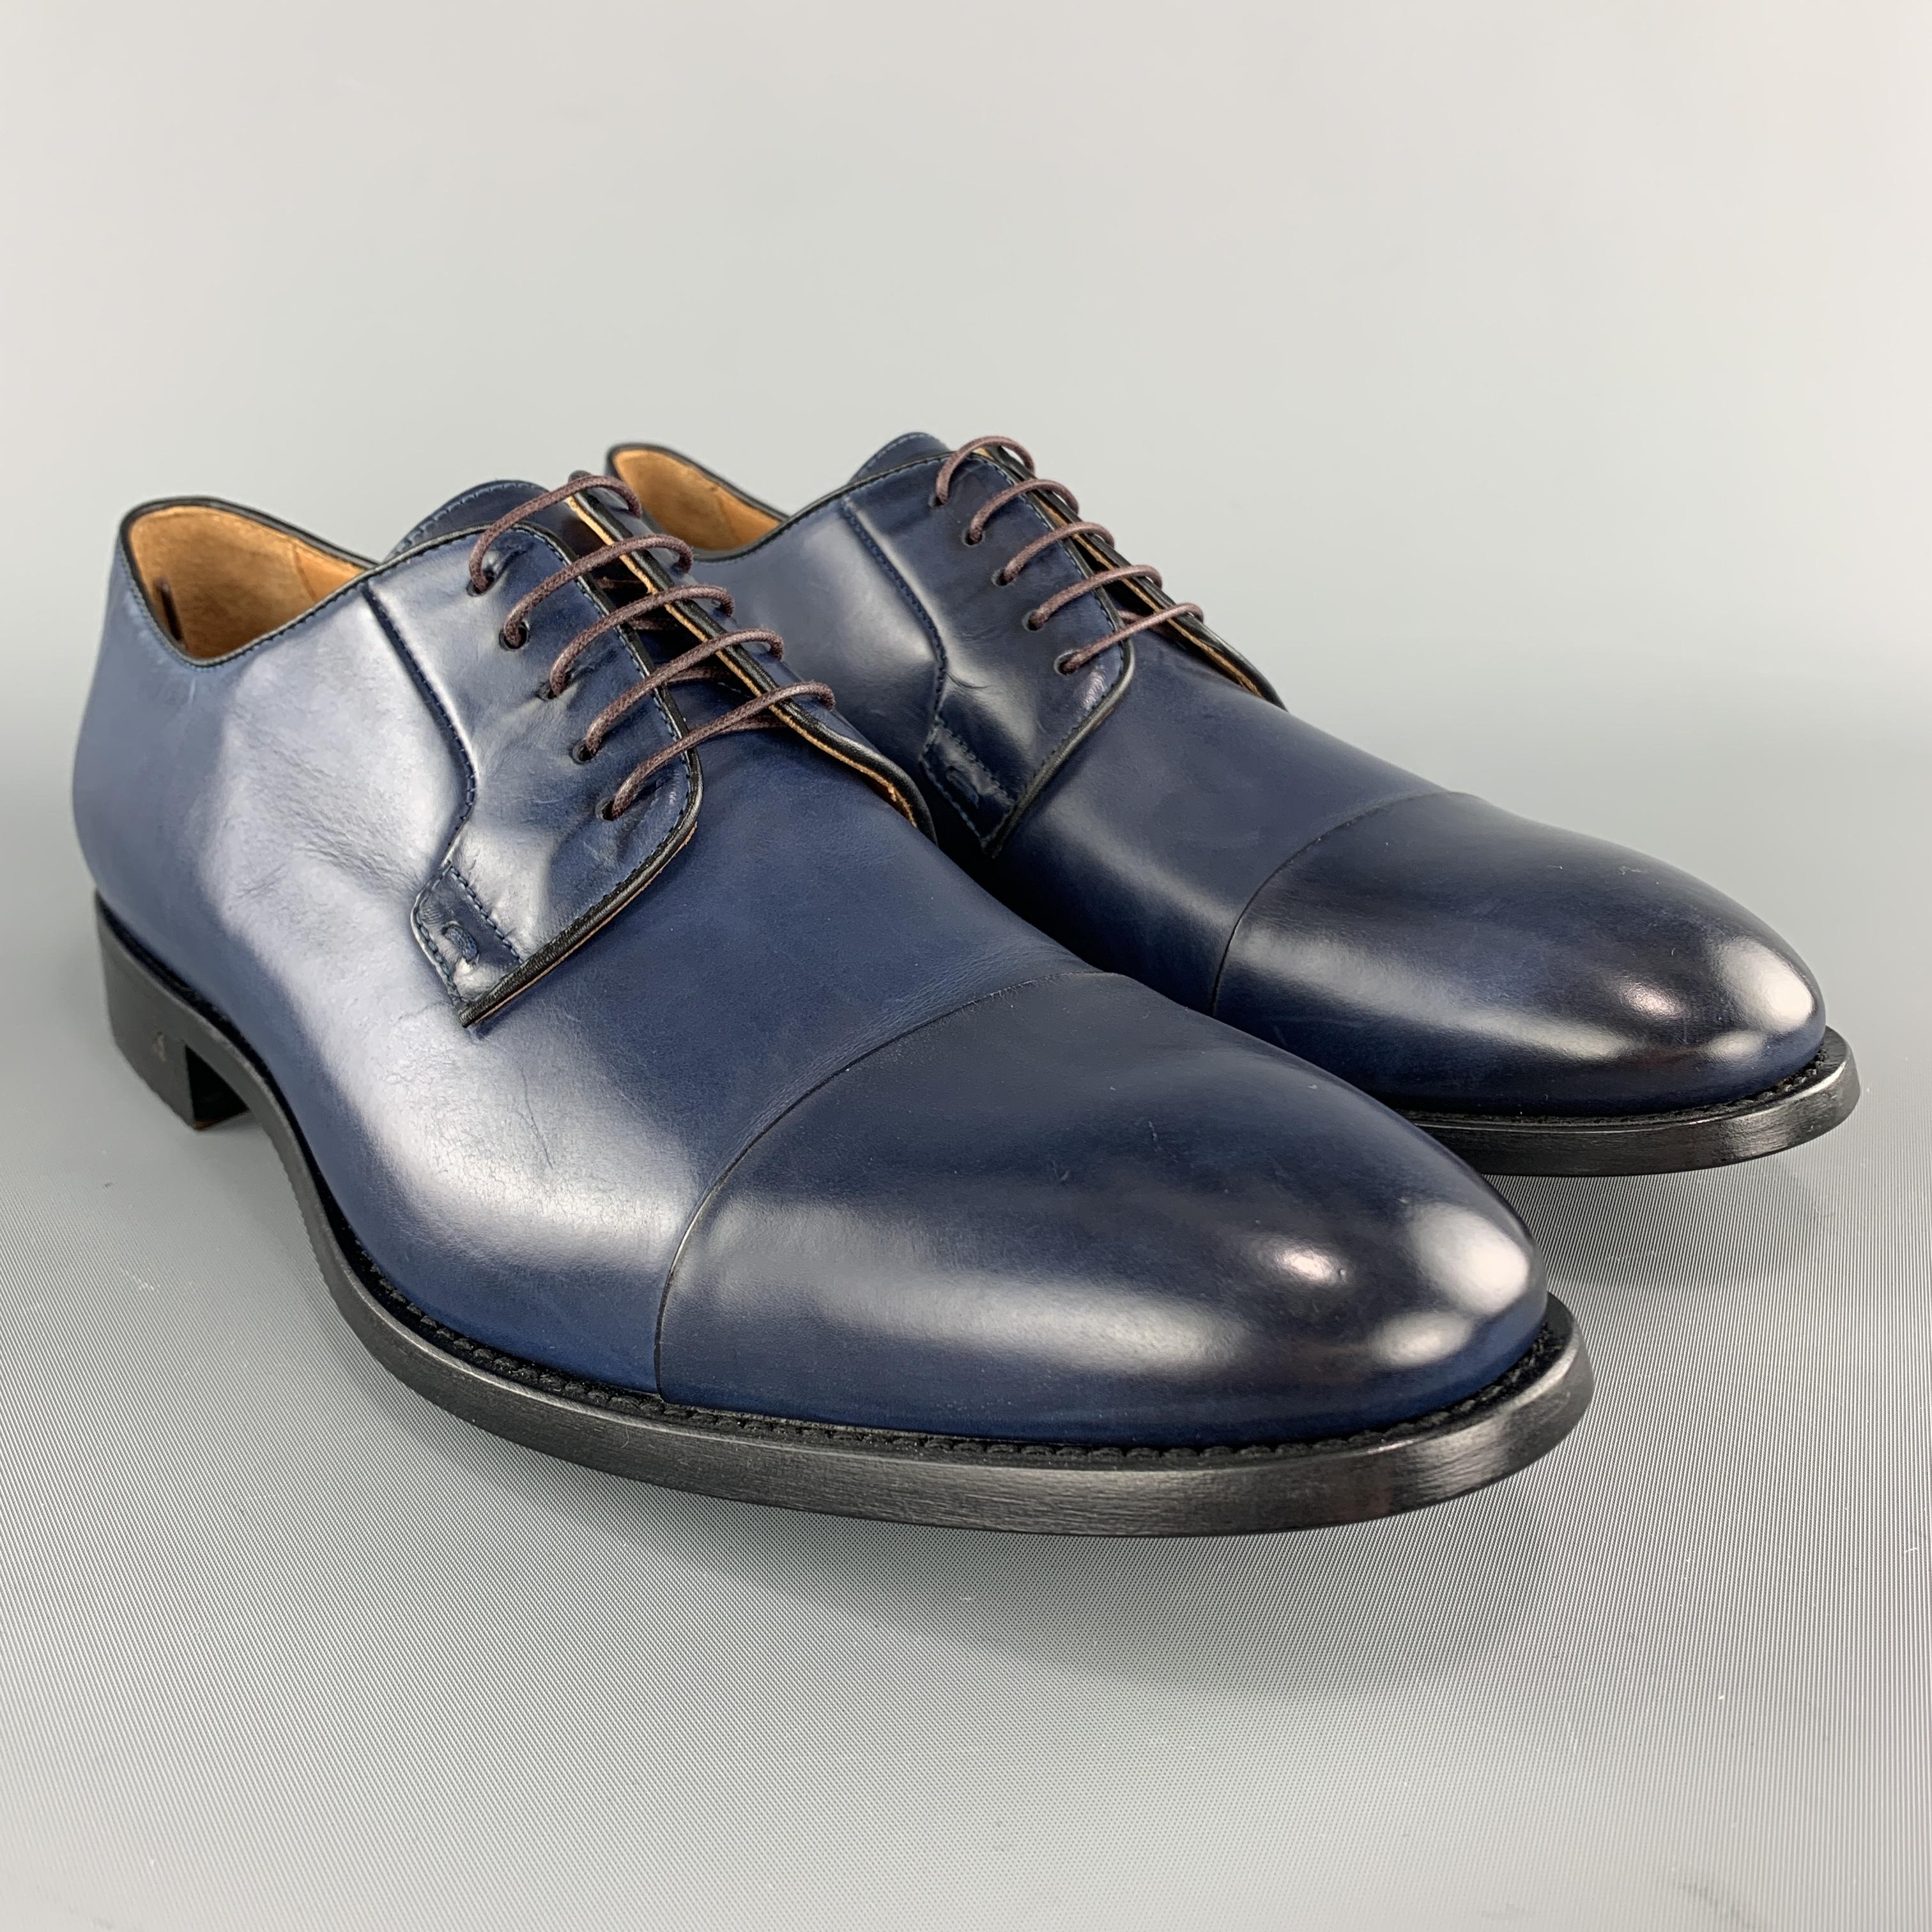 PS by PAUL SMITH dress shoes come in navy blue antique effect leather with a cap toe. Made in Italy.

Brand New.
Marked: UK 10

Outsole: 12.25 x 4.5 in.